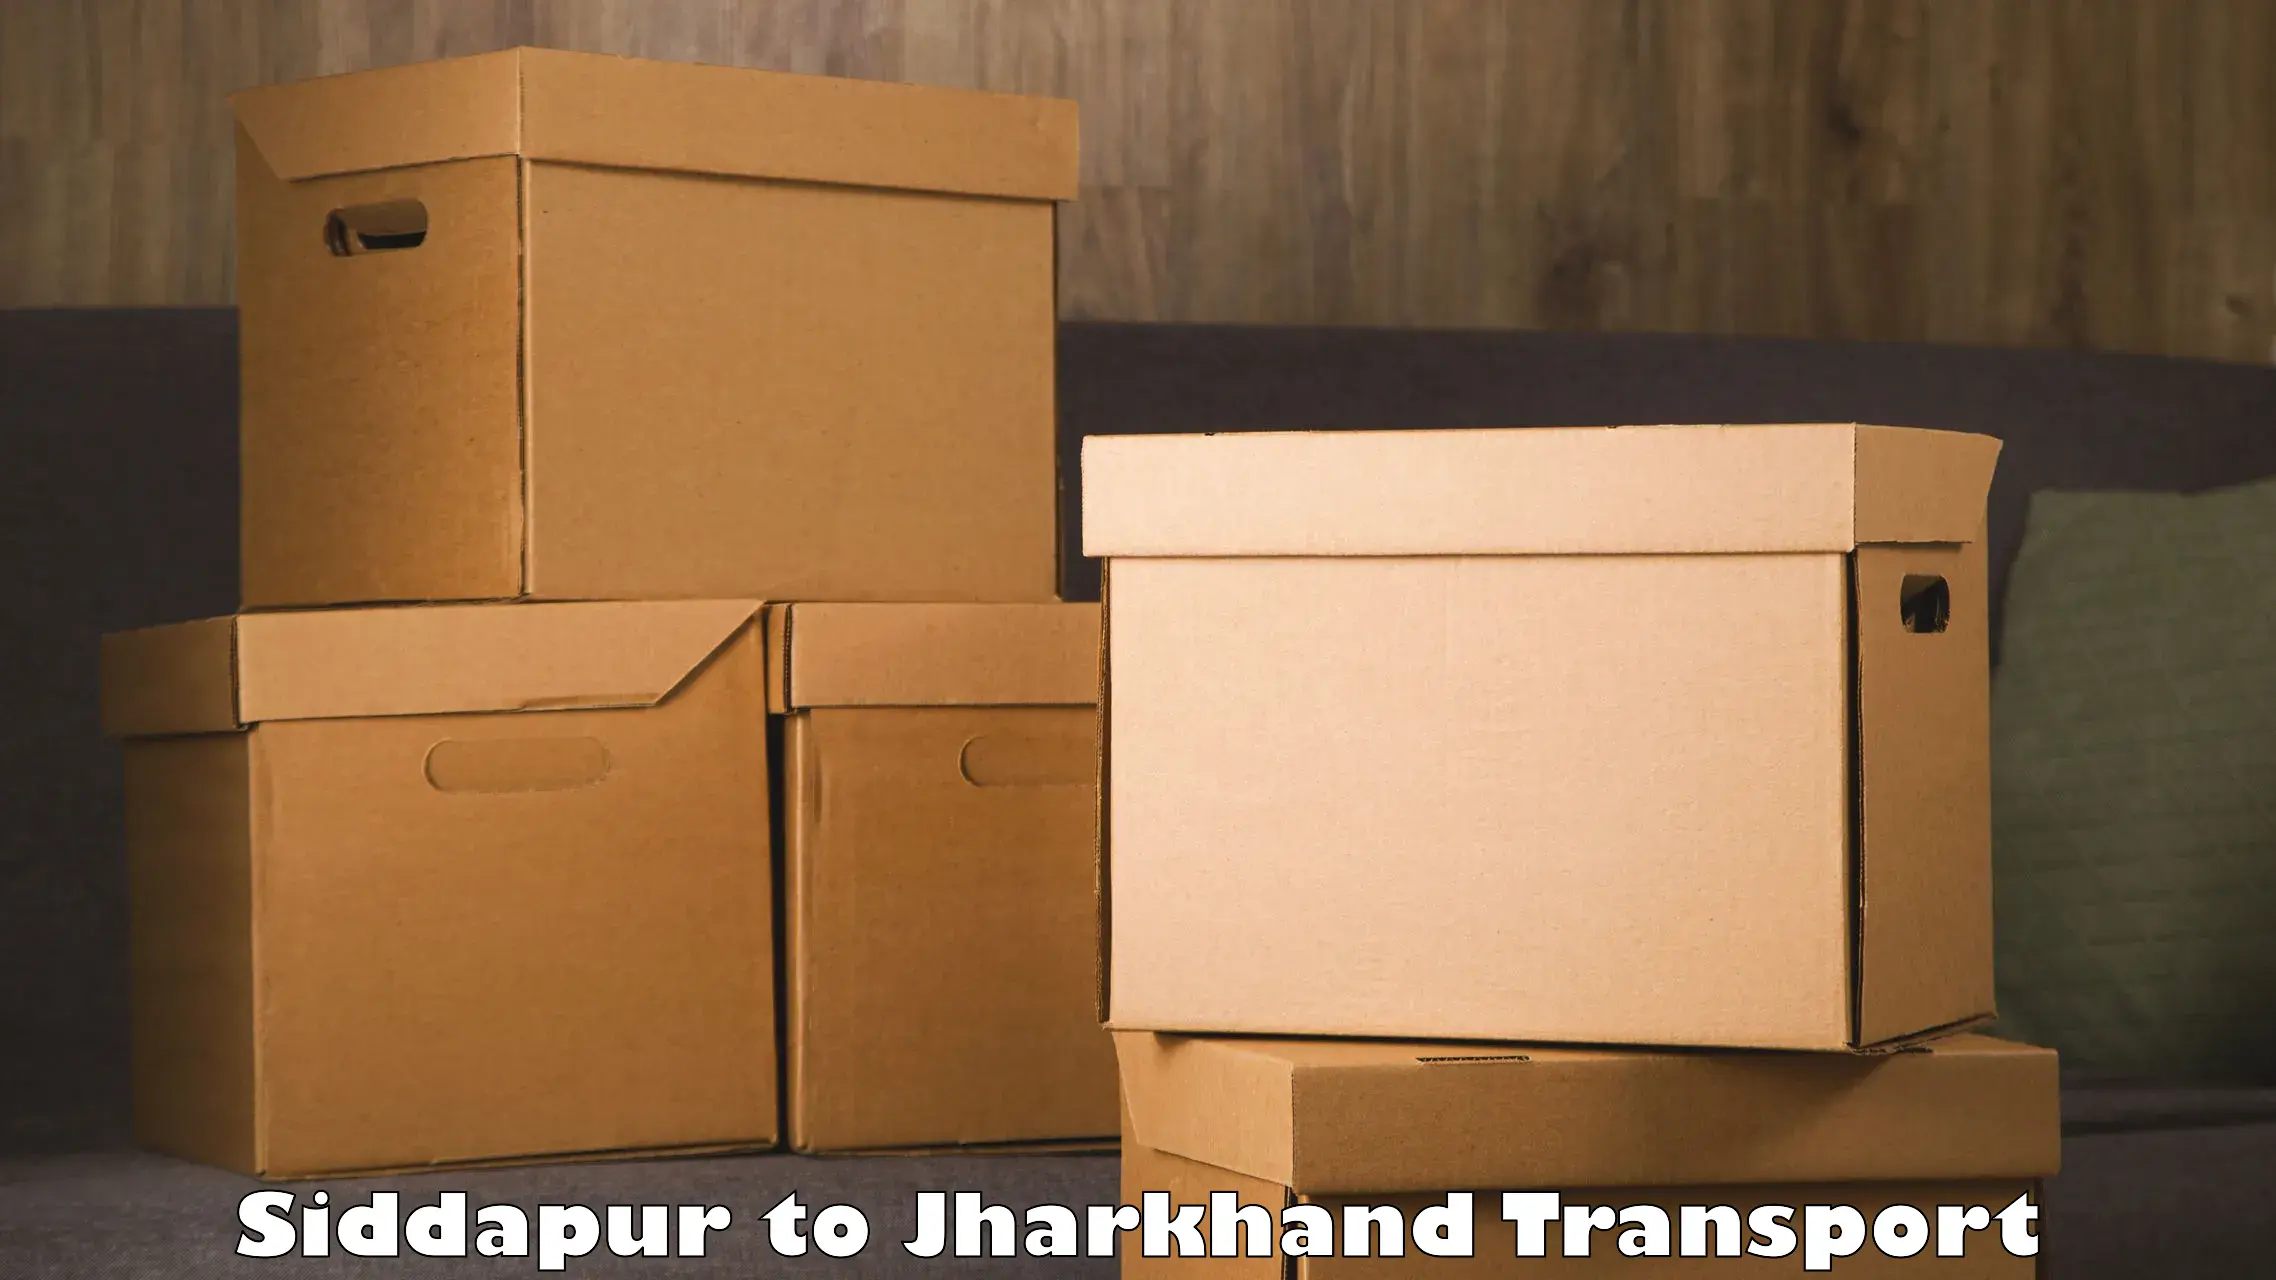 Pick up transport service Siddapur to Jharkhand